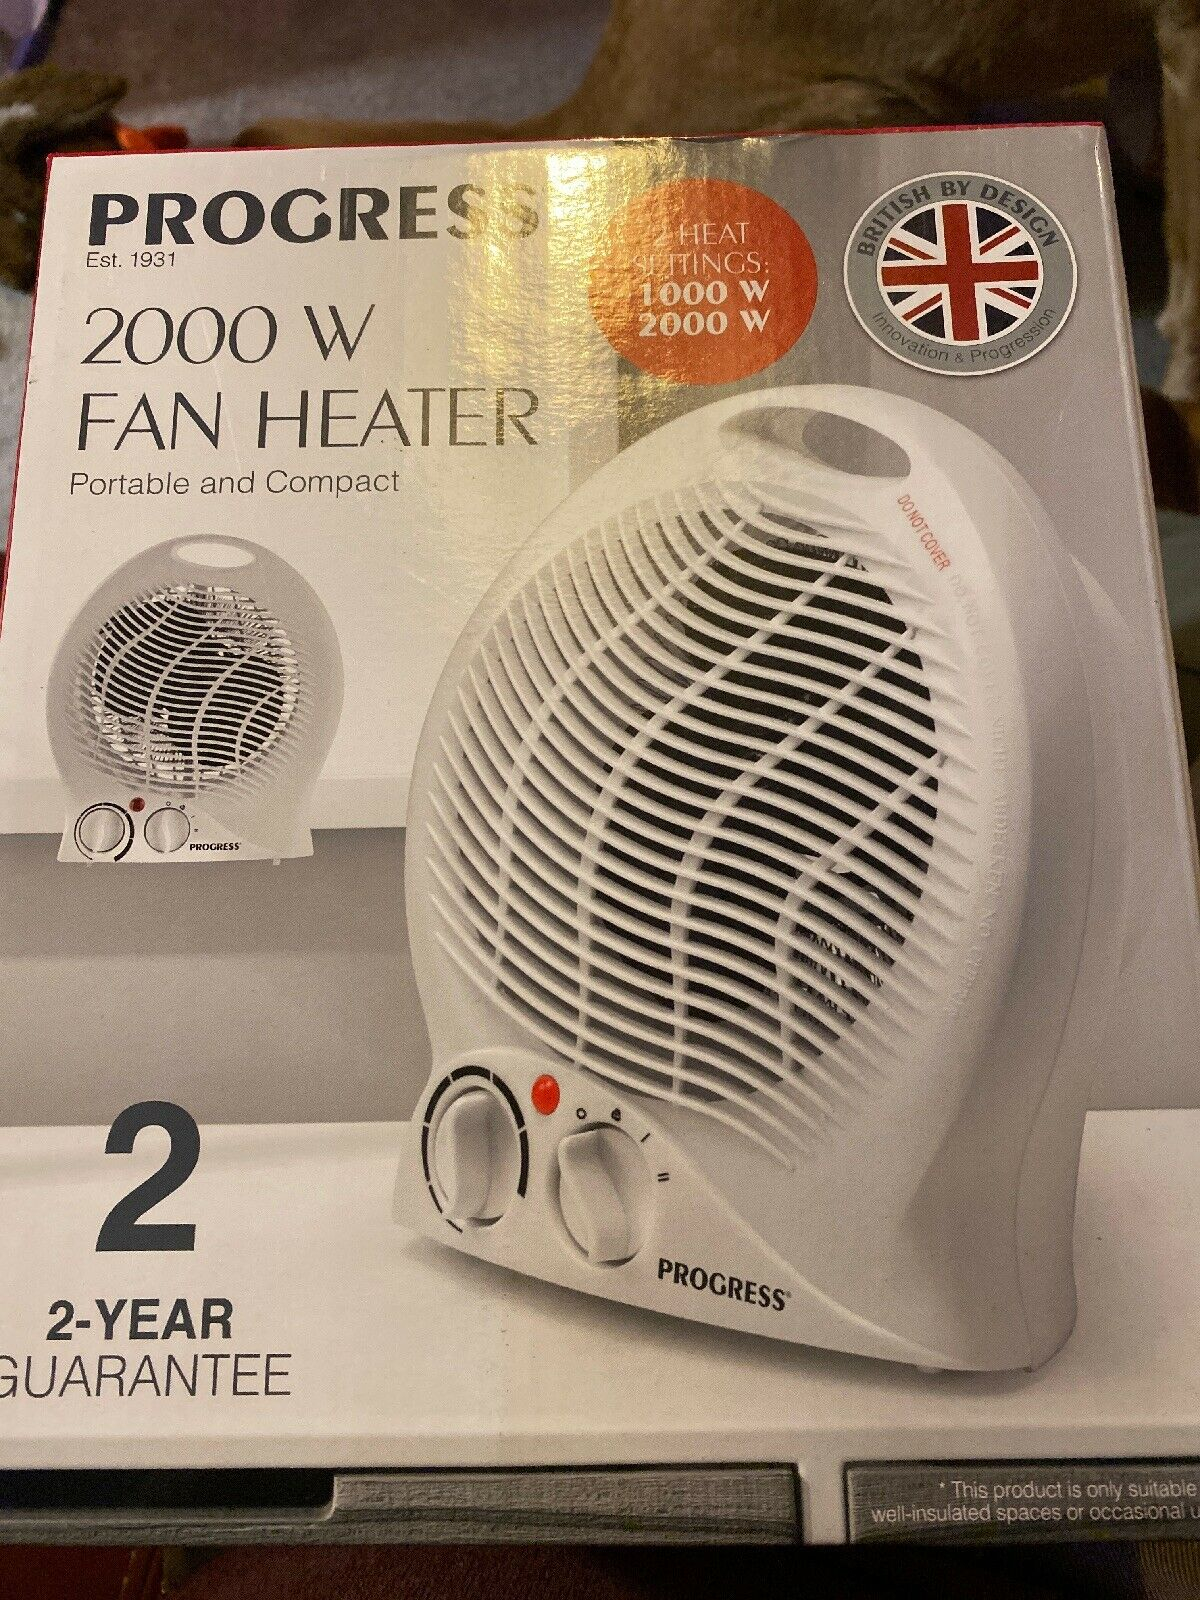 Progress 2000w Fan Heater Portable And Compact Eh3026mrfob within size 1200 X 1600